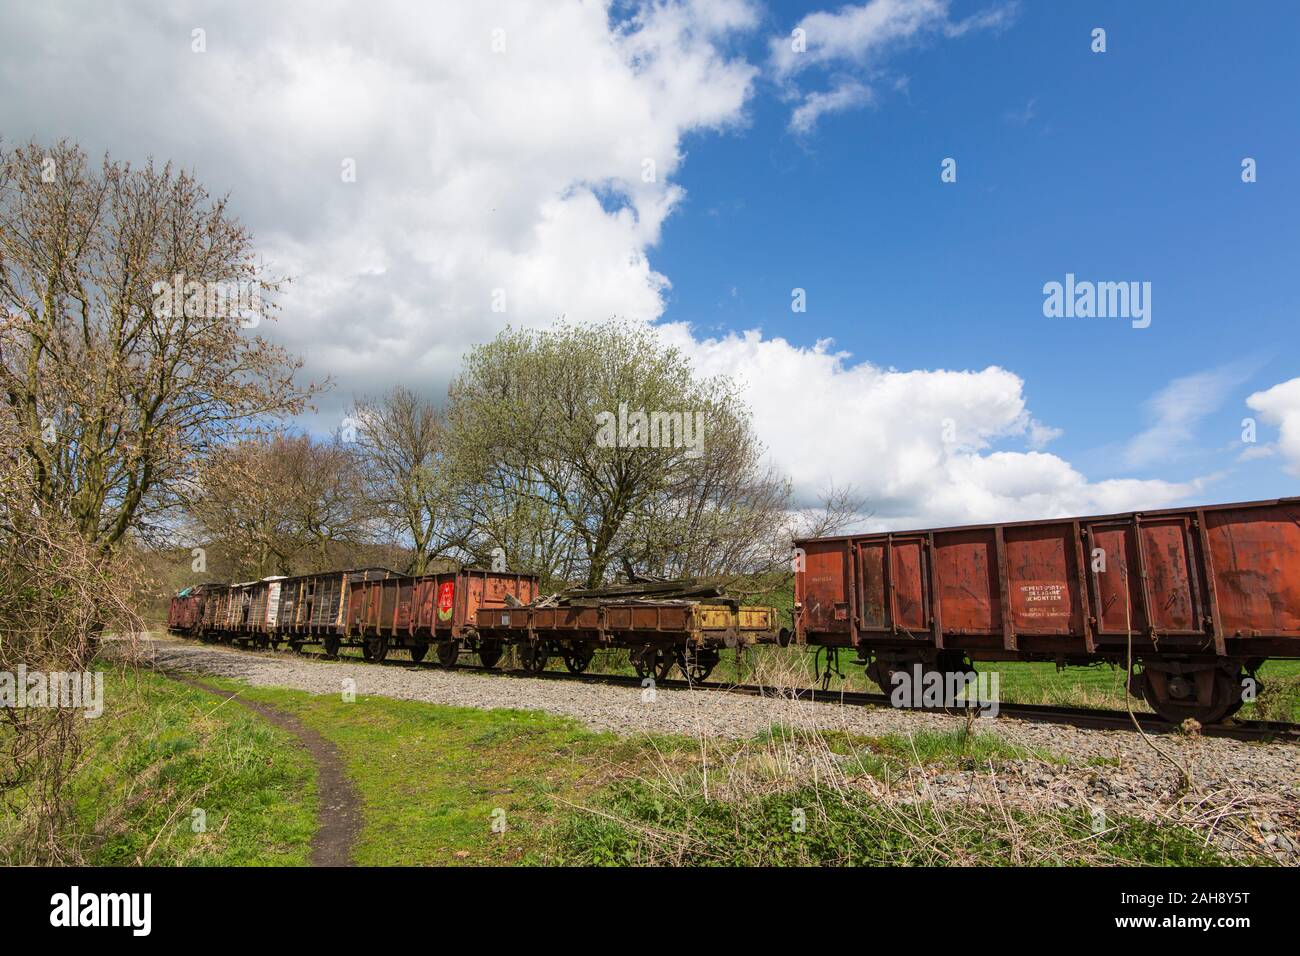 Vintage abandoned railway wagons at closed railway station in Belgium Stock Photo